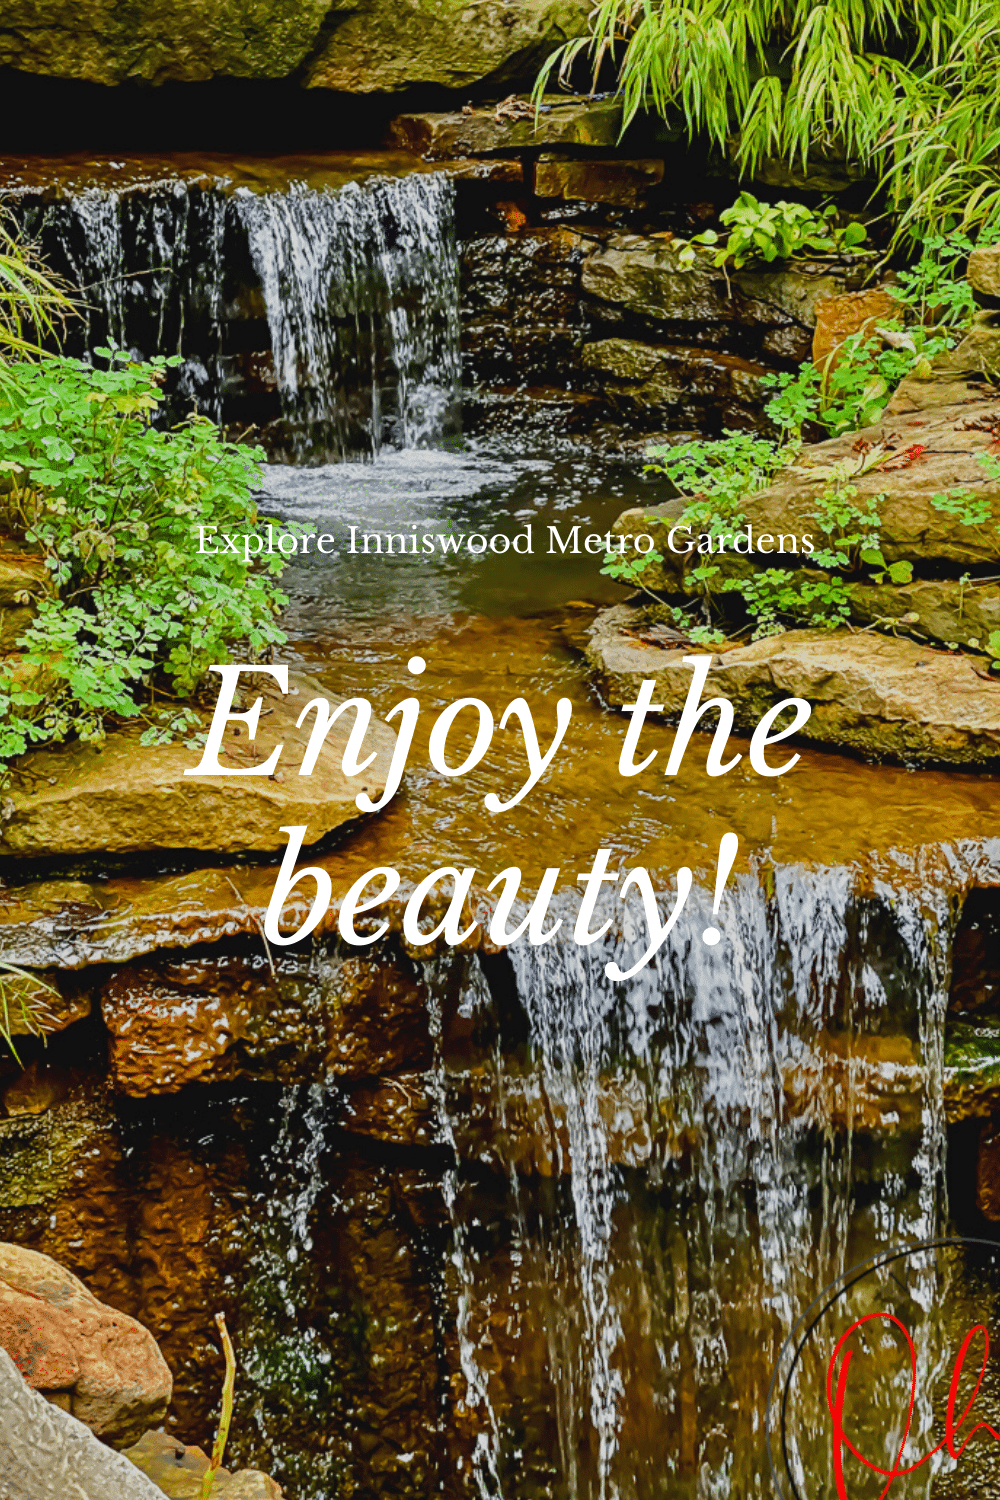 Inniswood Metro Gardens is a beautifully groomed and curated garden area located in Westerville, Ohio. Inniswood Metro Gardens is part of the Columbus Metro Parks. #metropark #columbusOhio #ohio